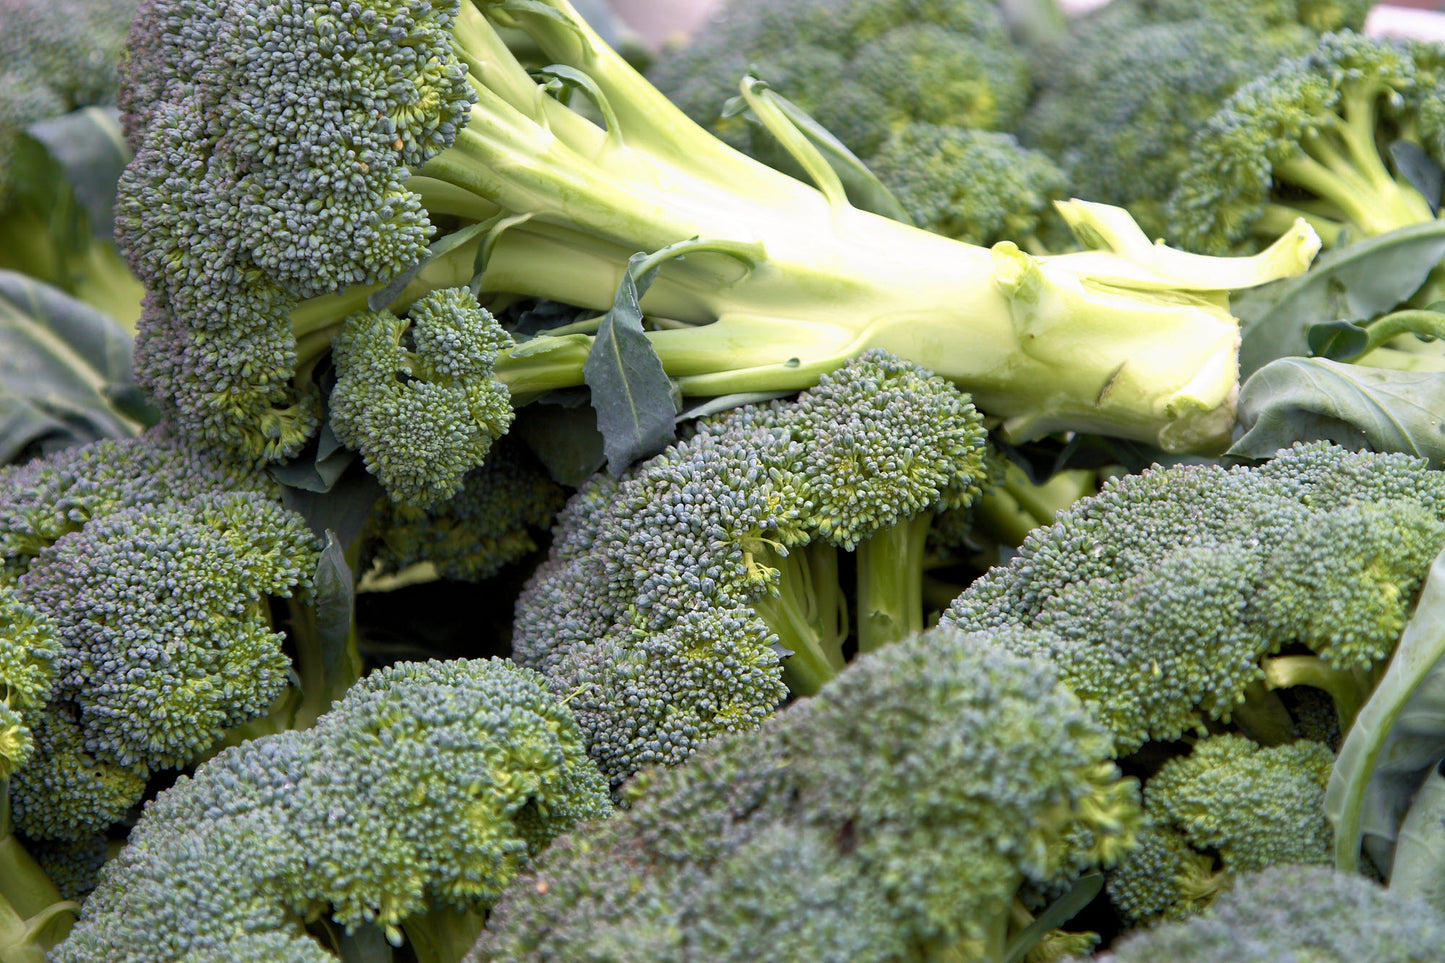 On display is broccoli, of the variety Green Sprouting Calabrese. We see fully matured broccoli spears stacked upright together tightly.  A single spear is laid horizontally from right to left on top of the stack of spears. The image is zoomed in such that we cannot see past the stack of broccoli spears. 